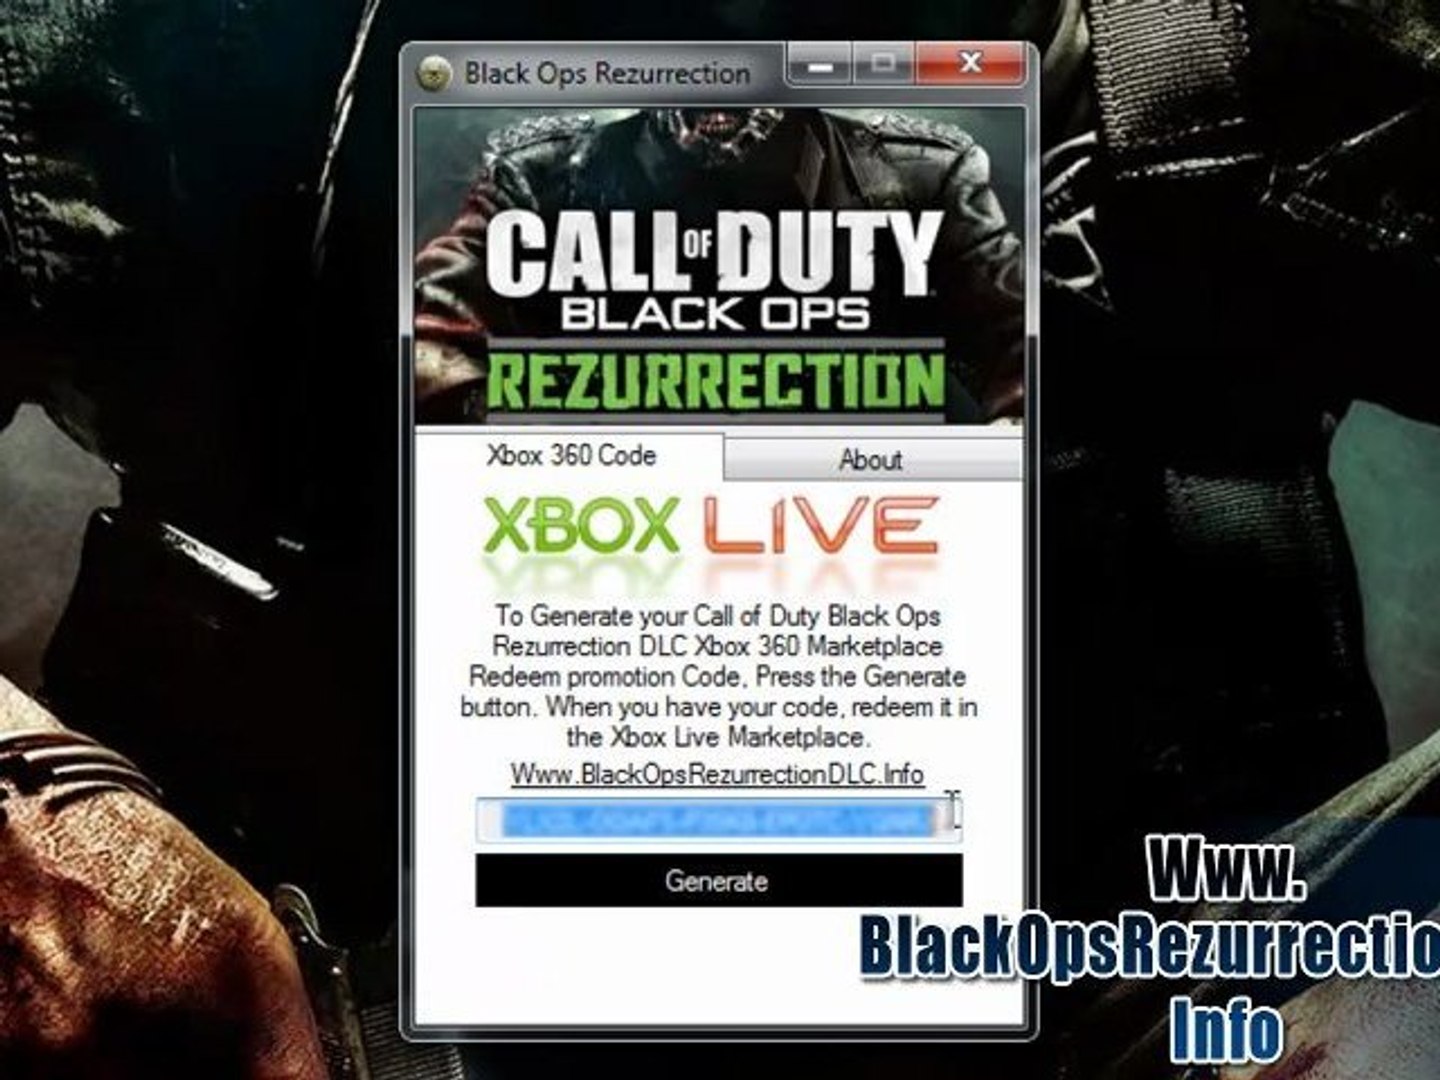 How to Download Black Ops Resurrection DLC Maps Free on Xbox 360 - video  Dailymotion